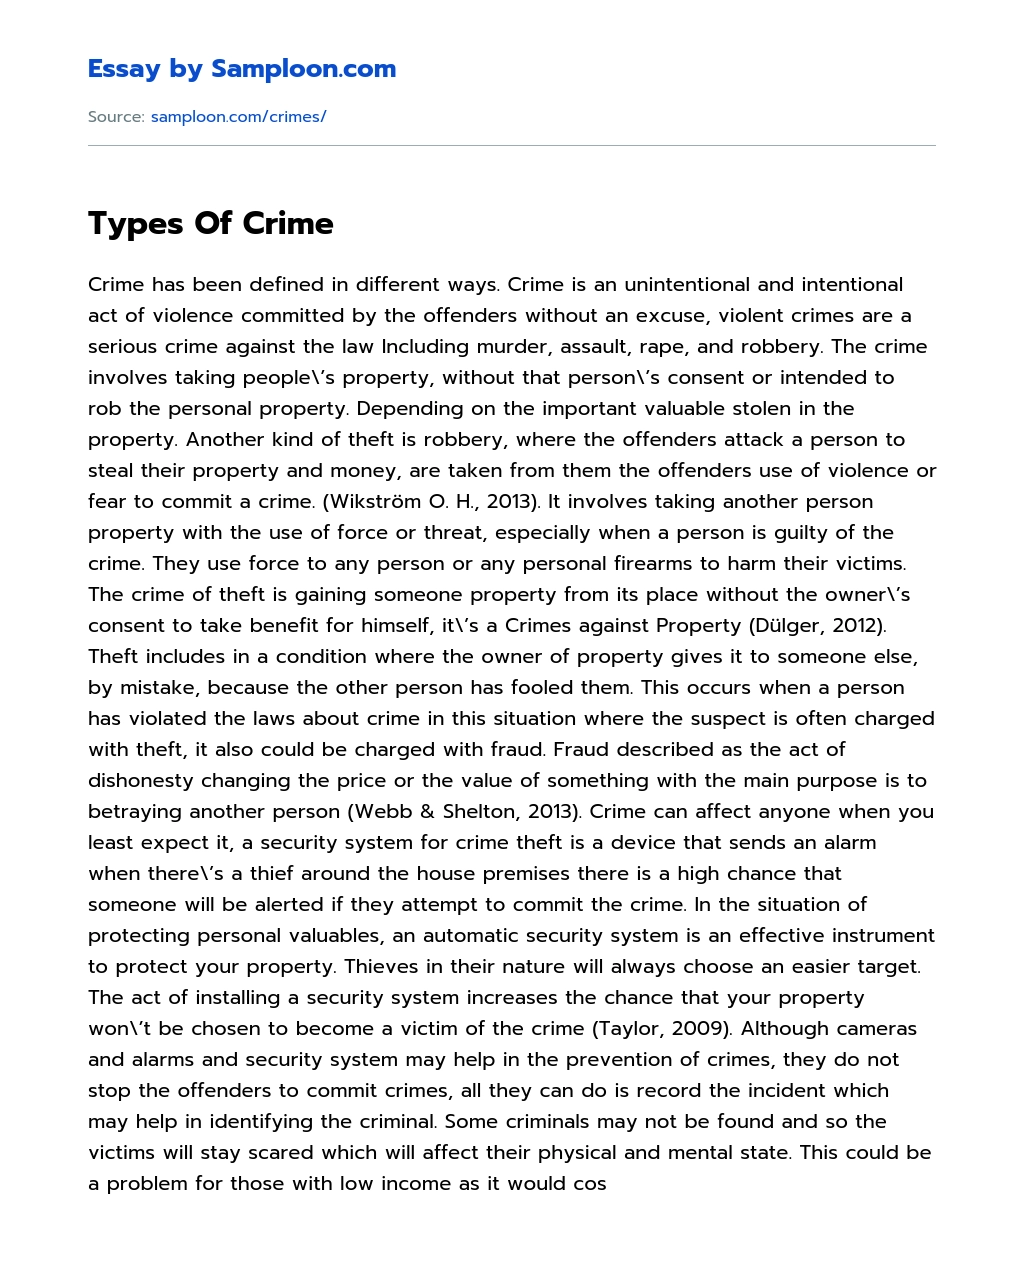 Types Of Crime essay